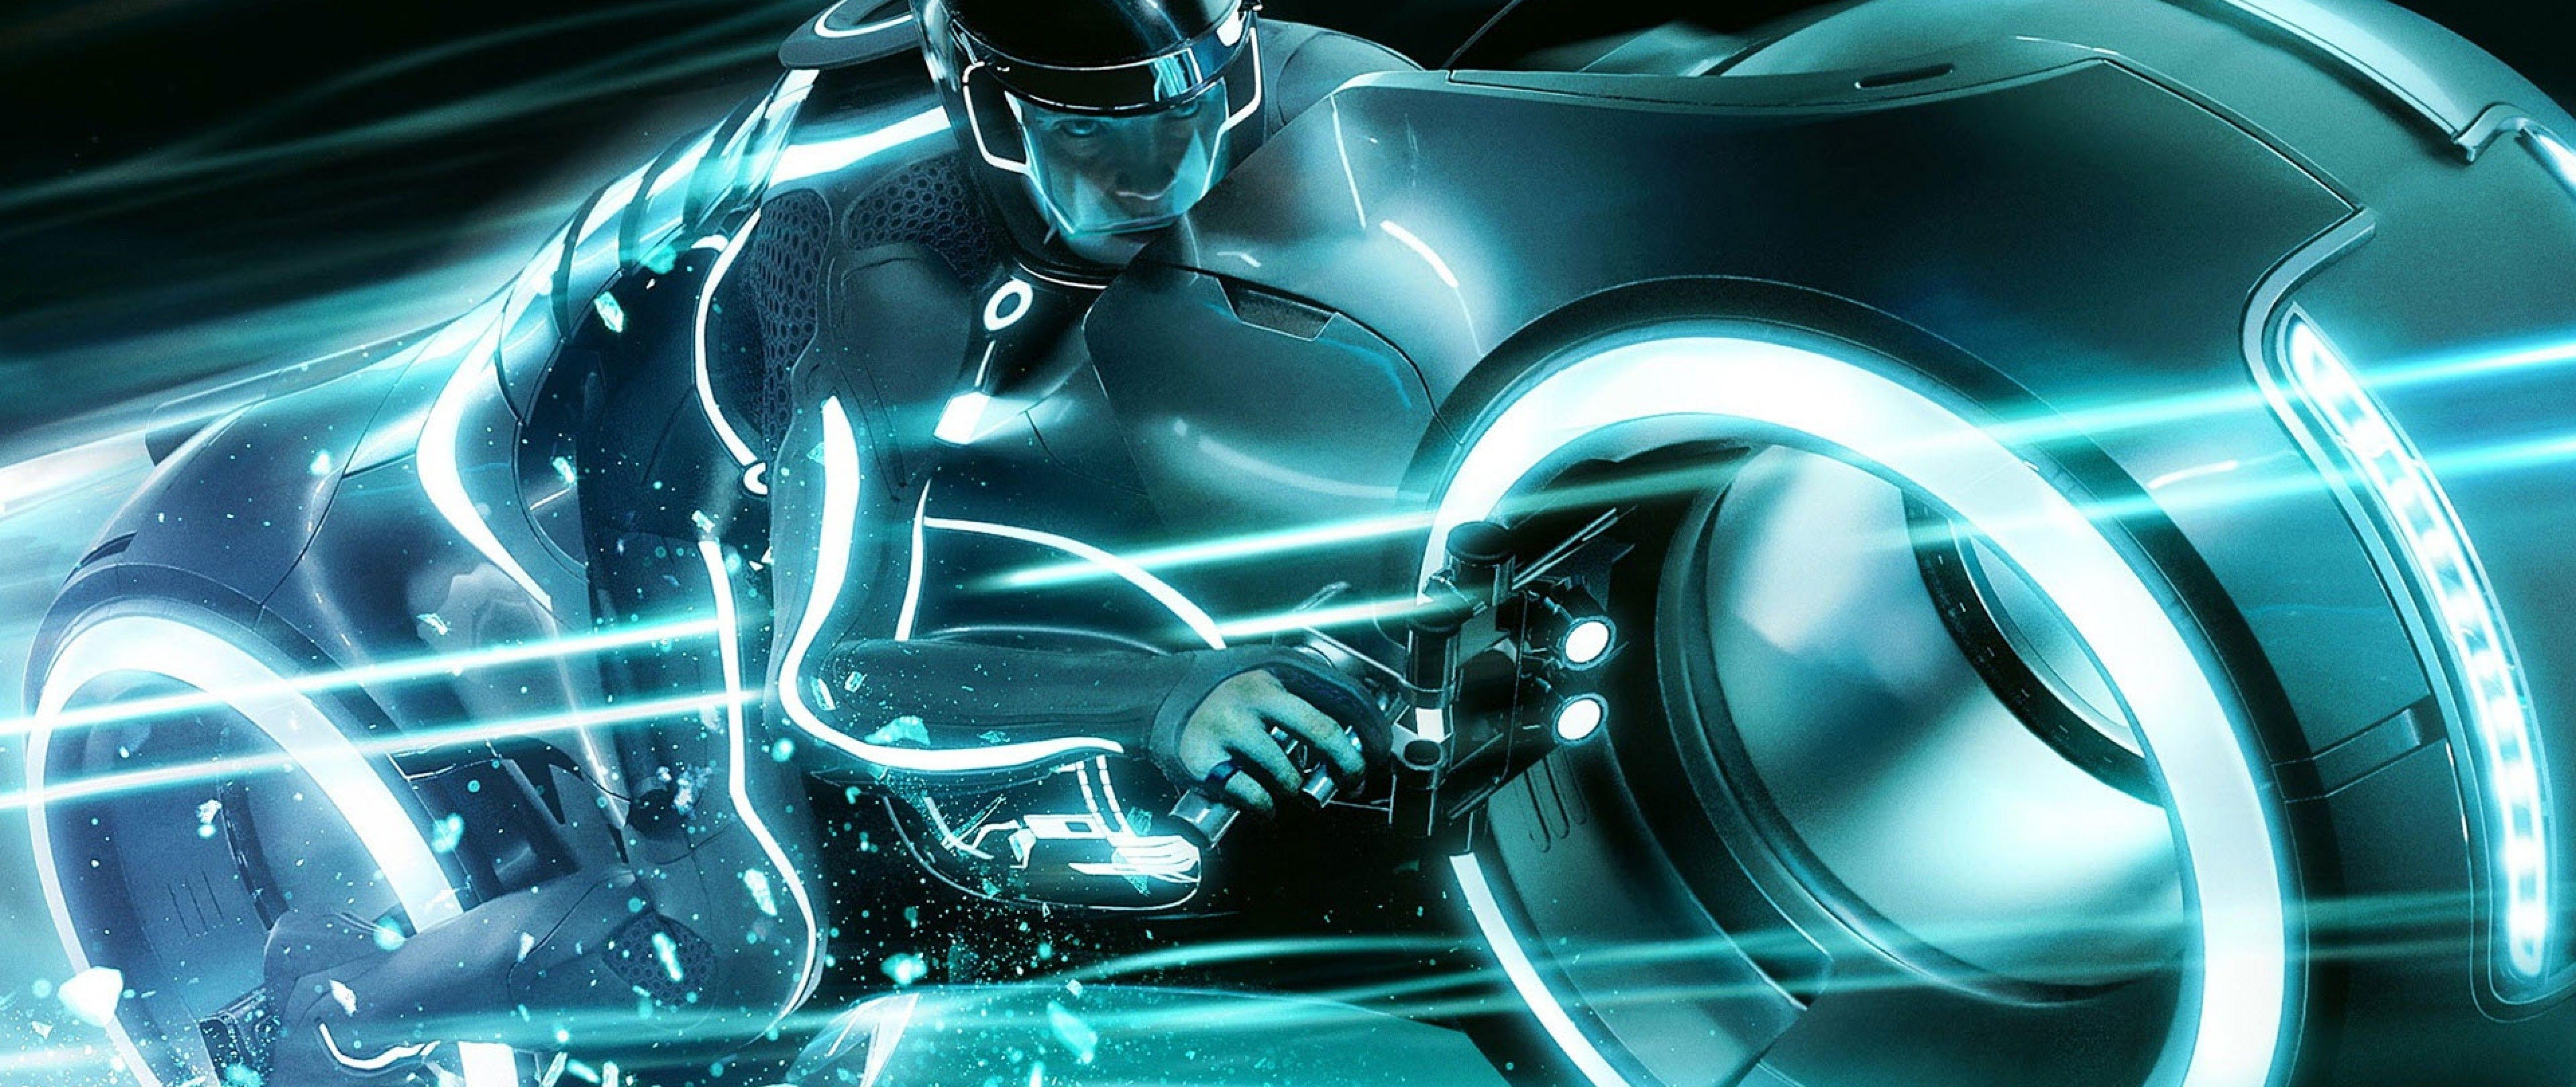 1251971 HD Tron Legacy Lightcycle  Rare Gallery HD Wallpapers